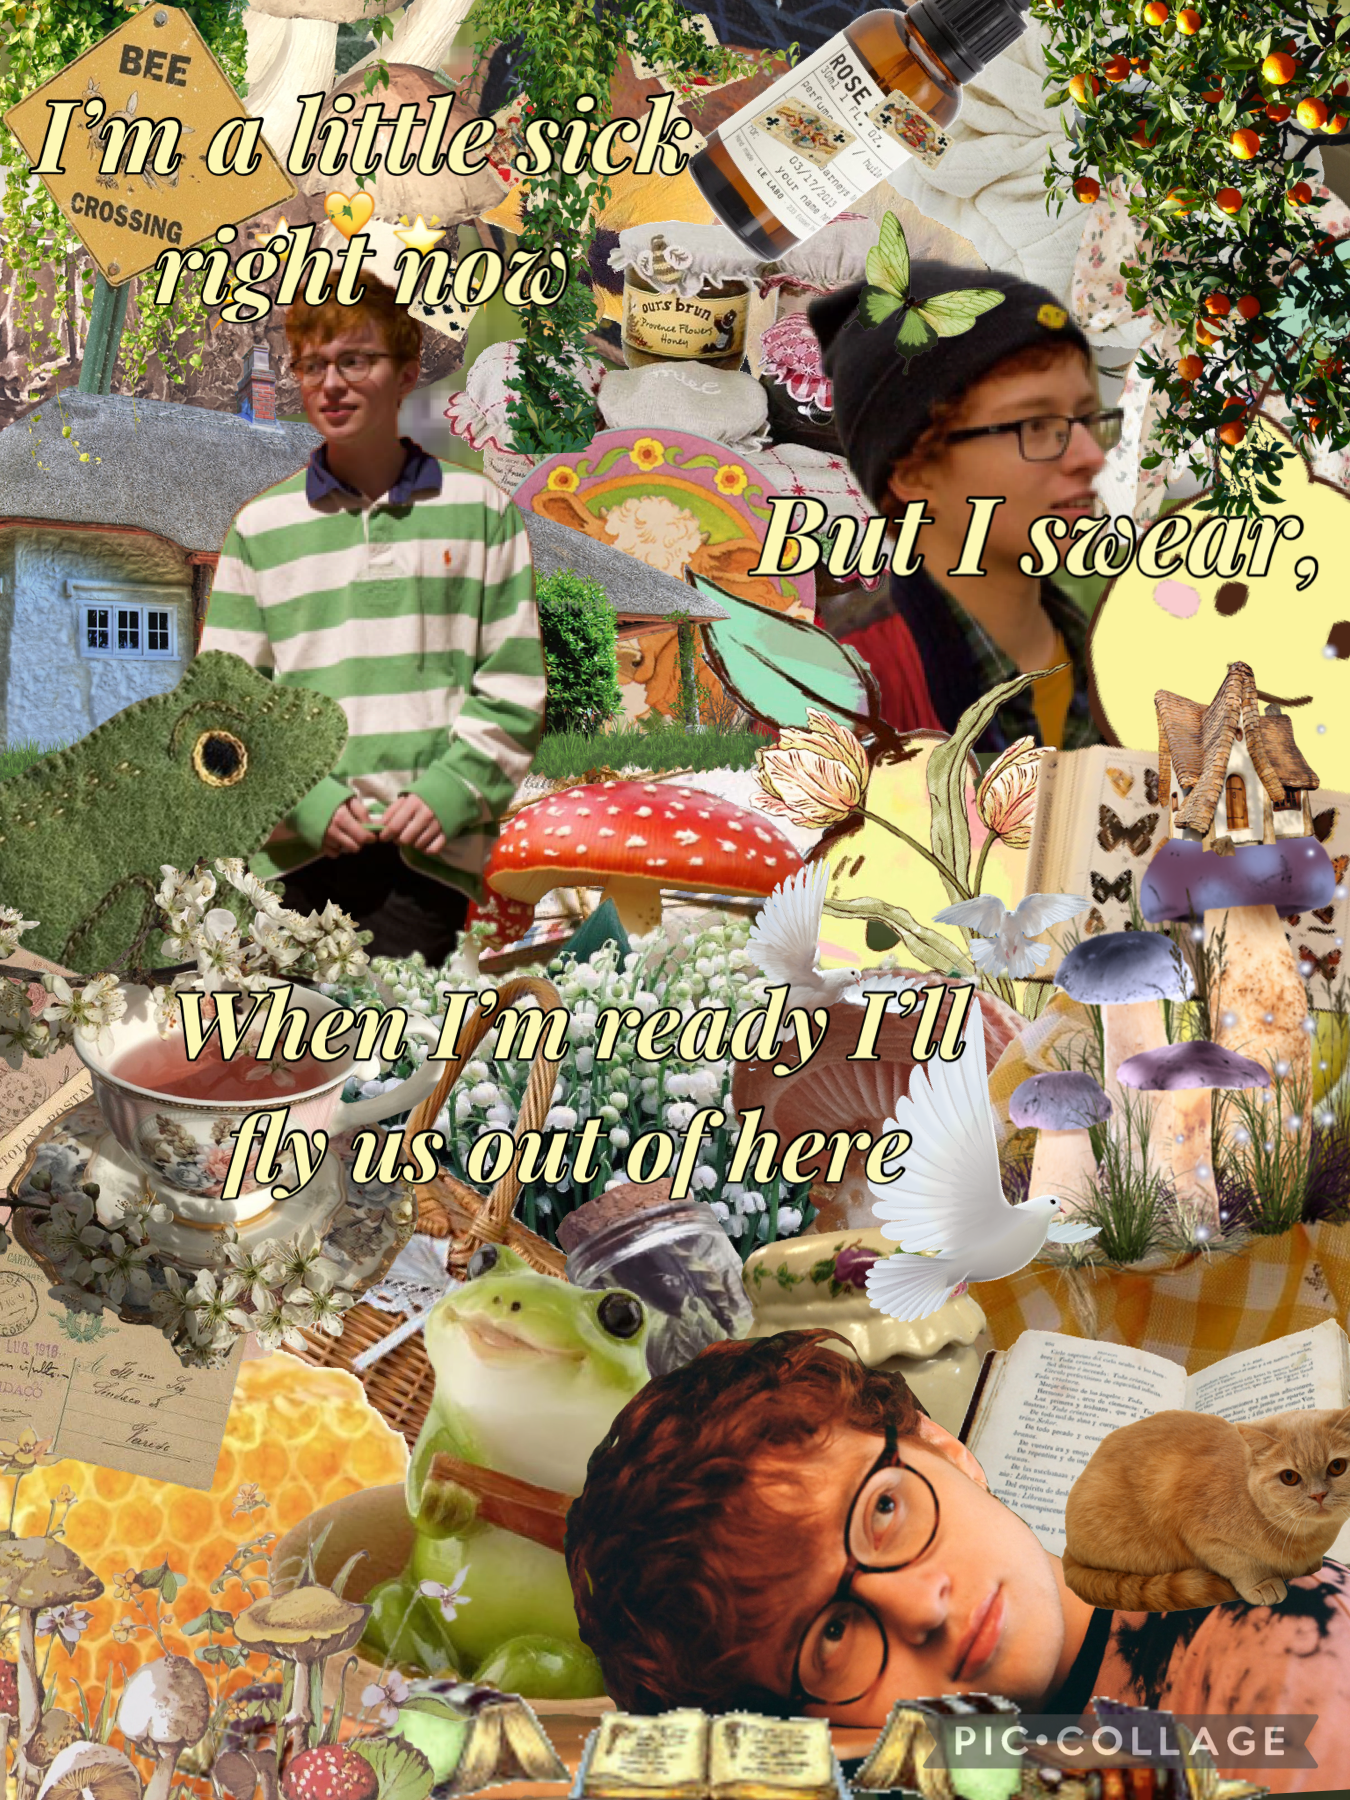 🌱𝕋𝕒𝕡🍄

Cave town/cottagecore collage!

SHOUTOUT to Kittycat2008, this collage for them was LONG overdue. Everyone who knows them can collectively agree that they are one of the just most genuinely kind people on pic collage, they have always taken a minut